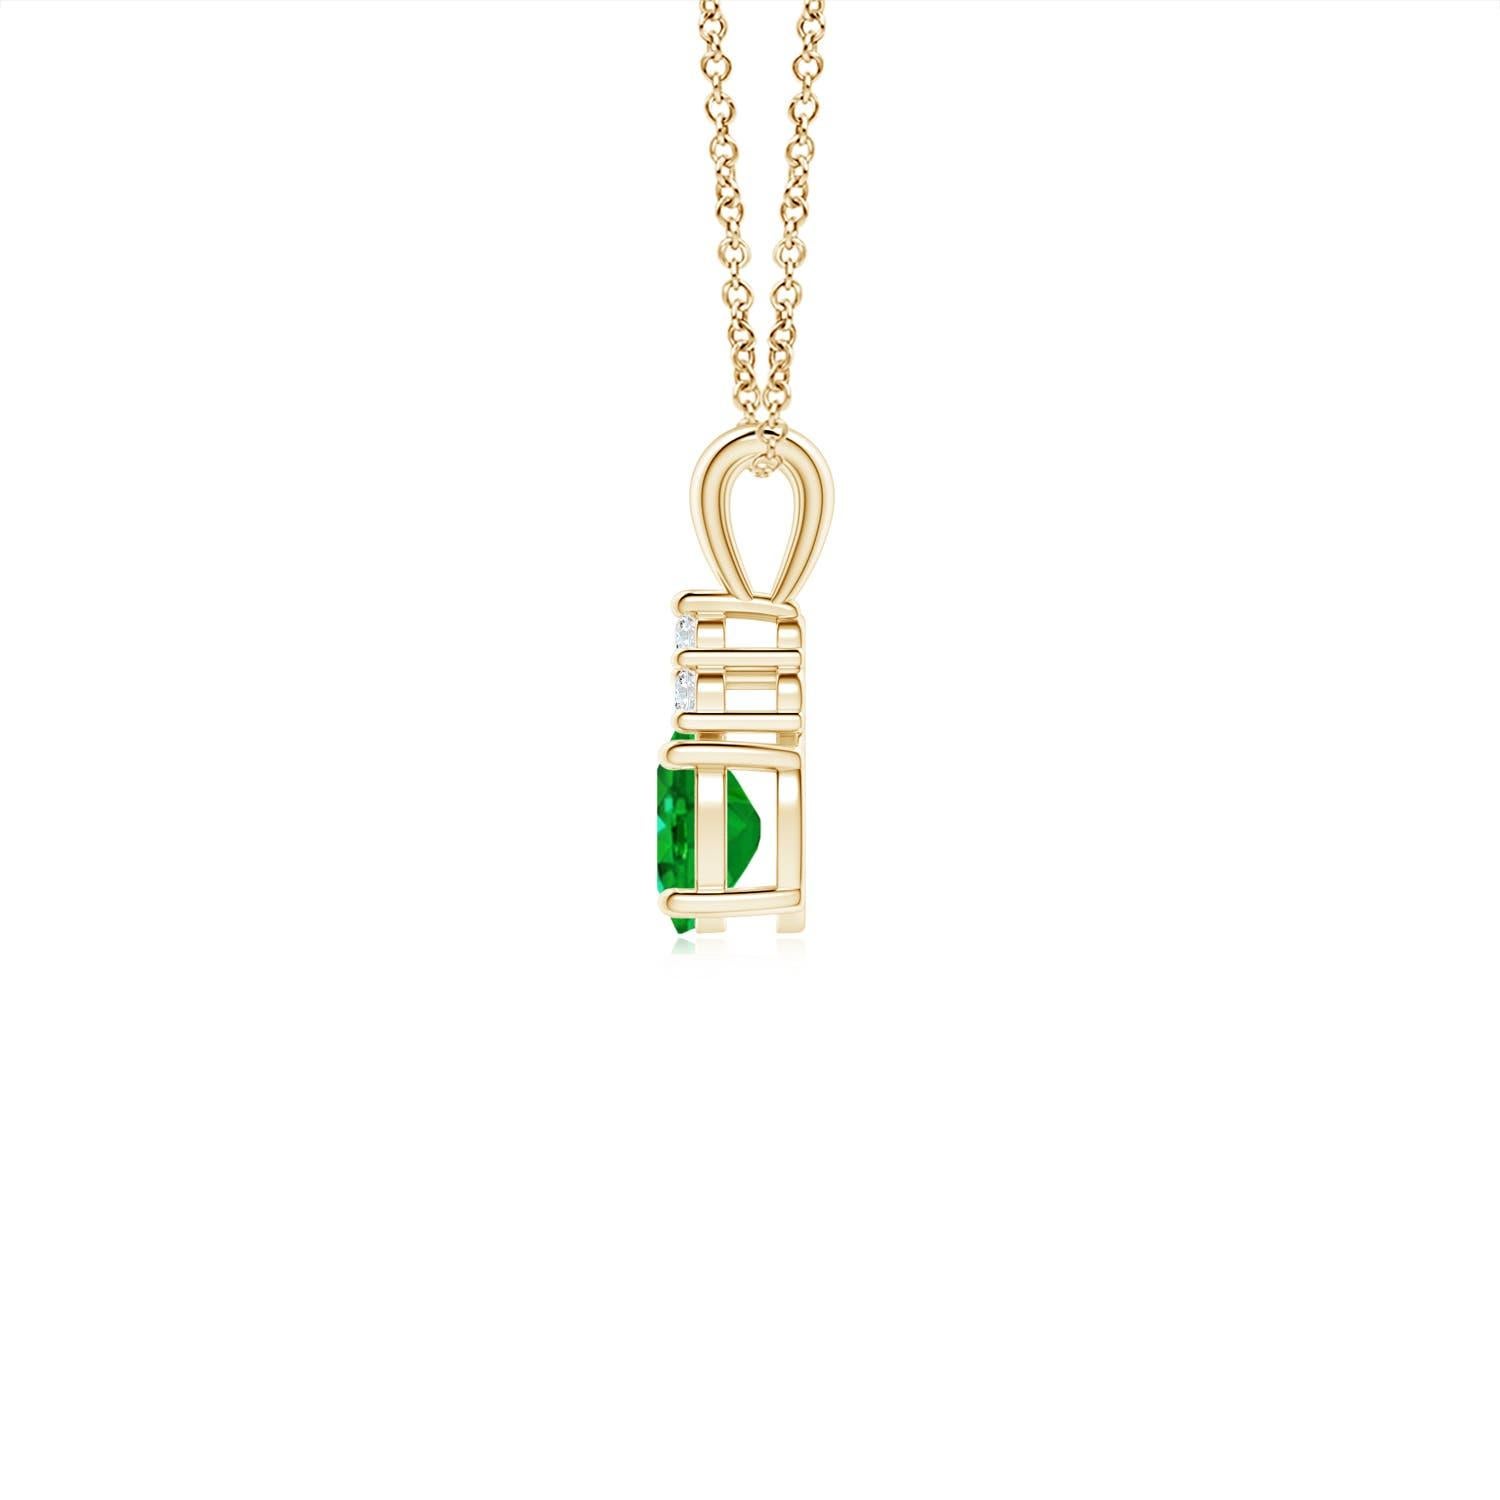 Set in 14k yellow gold, this classic solitaire emerald pendant showcases the perfect blend of style and elegance. It features a lush green emerald adorned with three sparkling round diamonds on the top. Linked to a lustrous v-bale, this four-prong